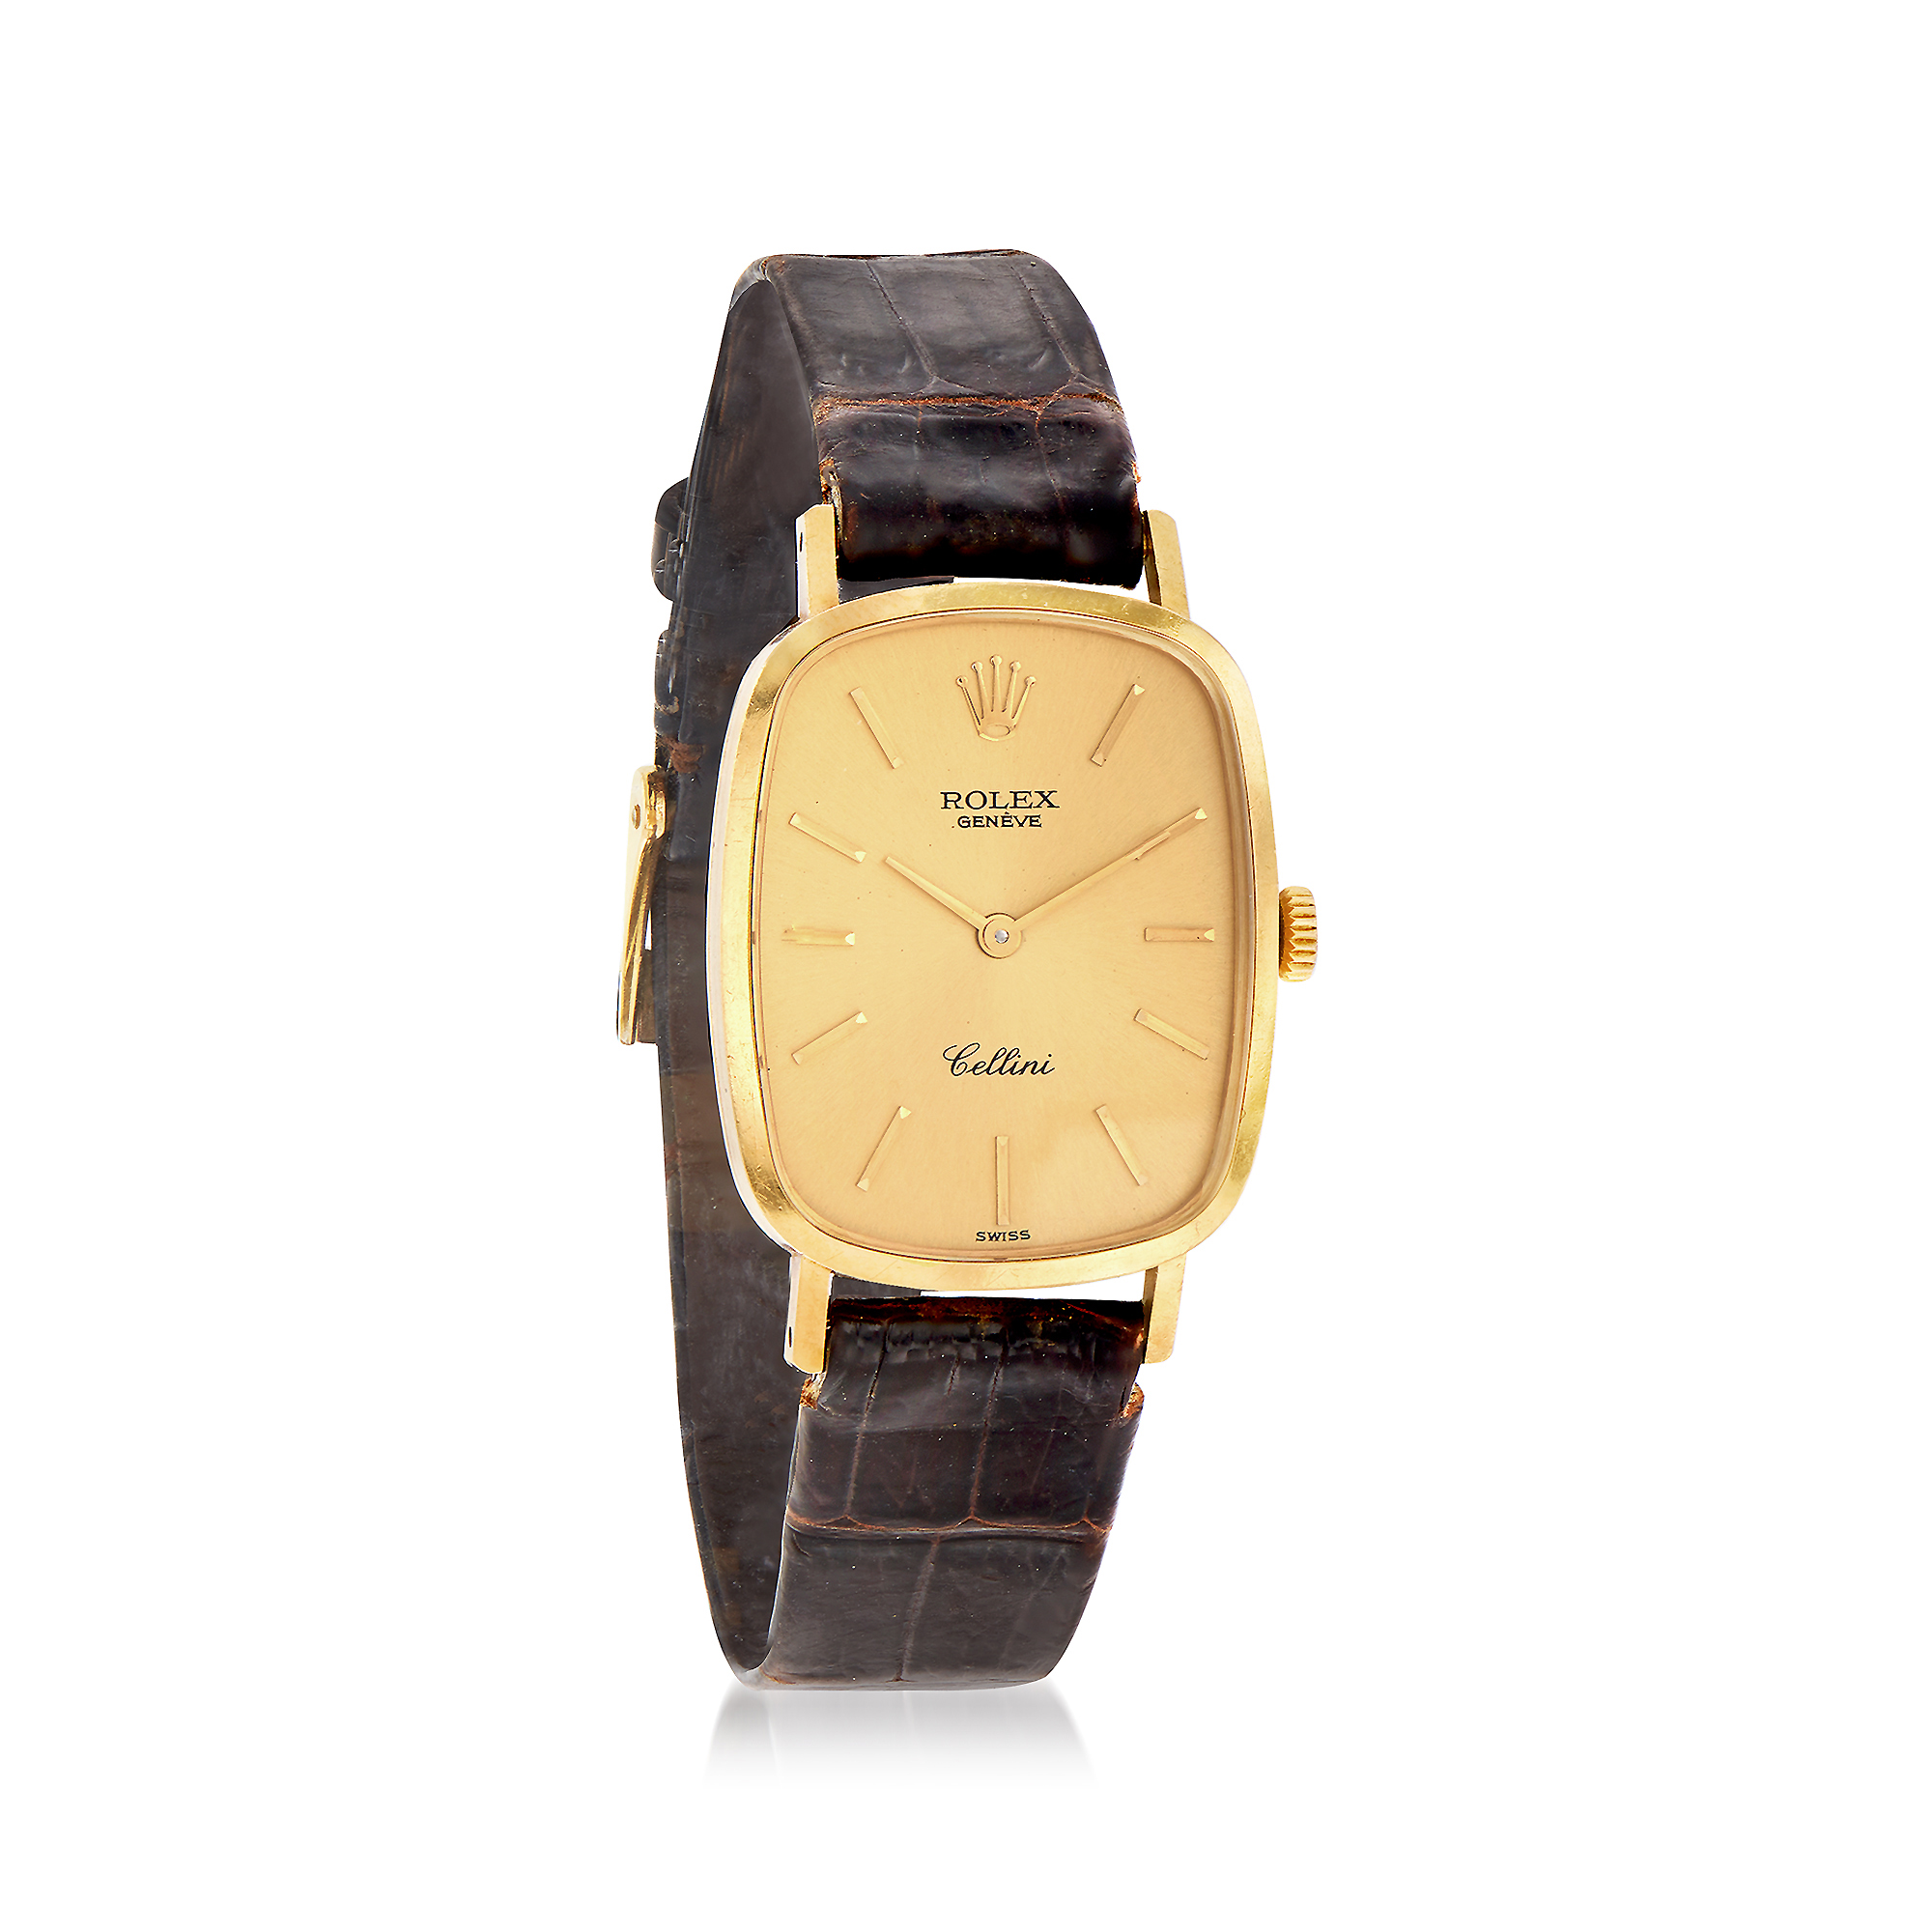 C. 1970 Vintage Rolex Cellini Women's 22mm Manual Watch with Black Leather  in 18kt Yellow Gold | Ross-Simons